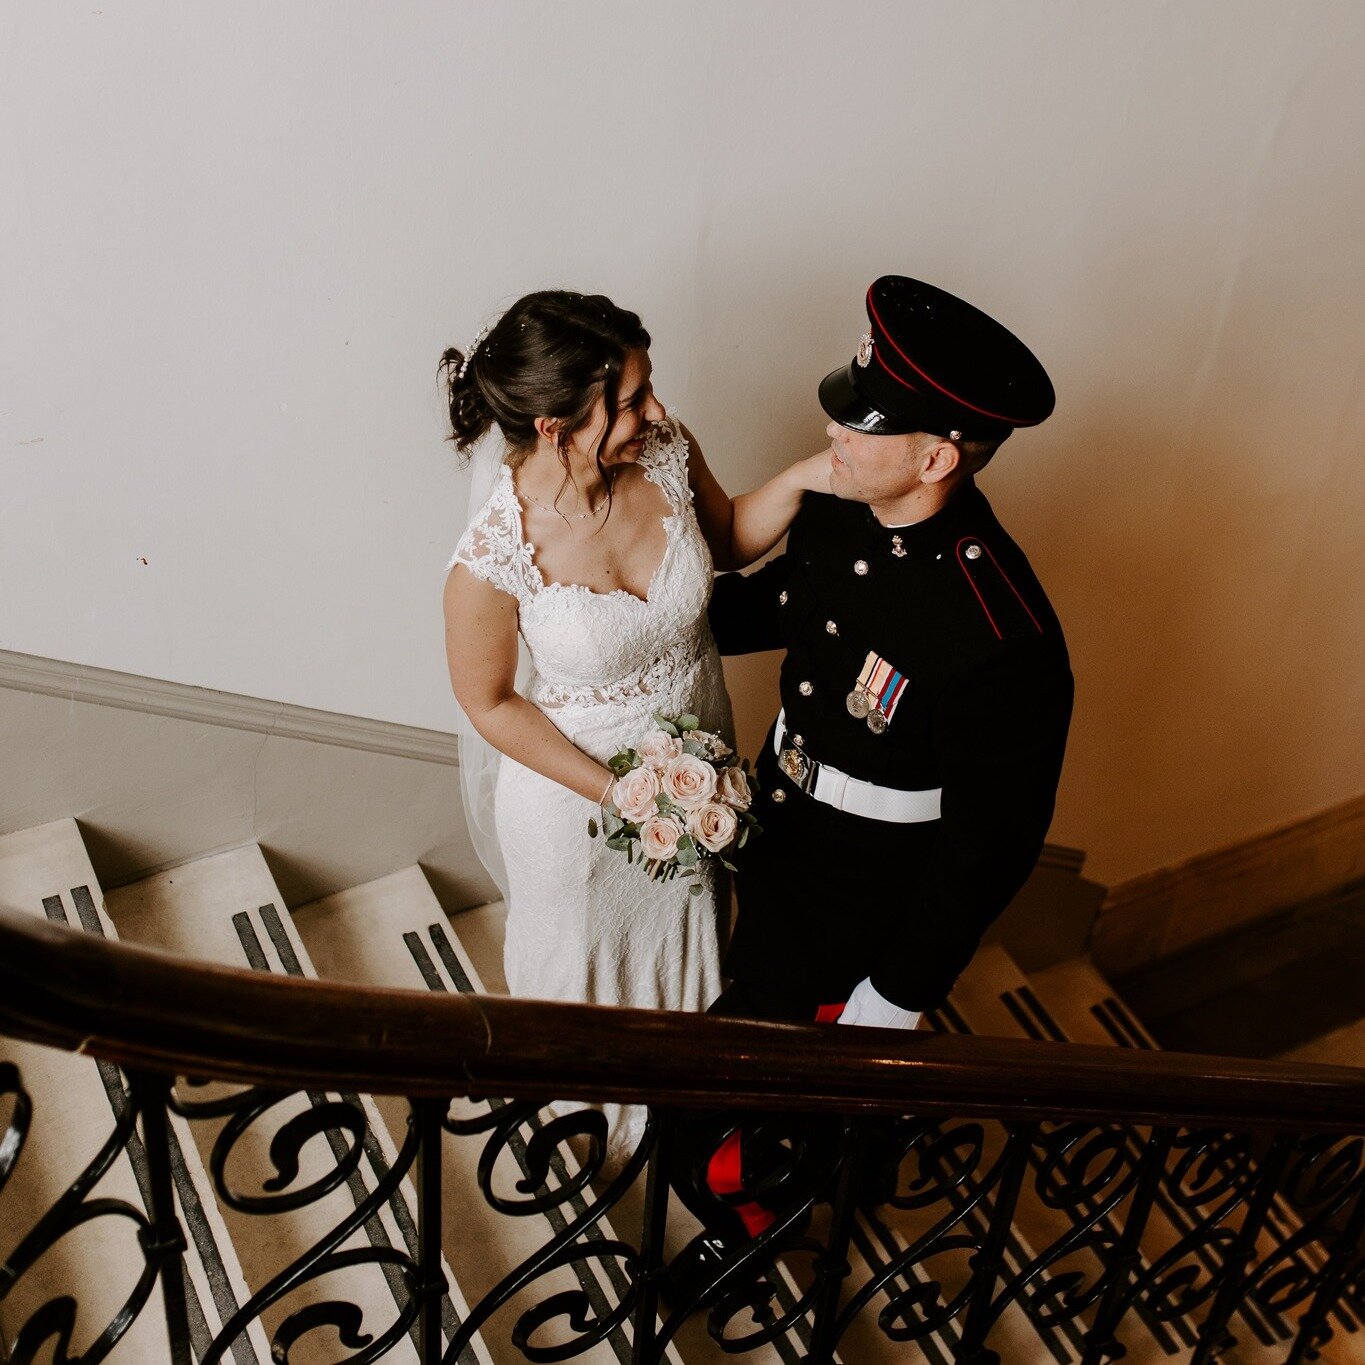 &quot;What a day! Kirsty was thrilled to capture our first wedding of the year for S&amp;B in stunning Winchester. From the emotional first look to the relaxed afternoon tea, it was a beautiful celebration of love.

https://www.sadieosborne.co.uk/
.
